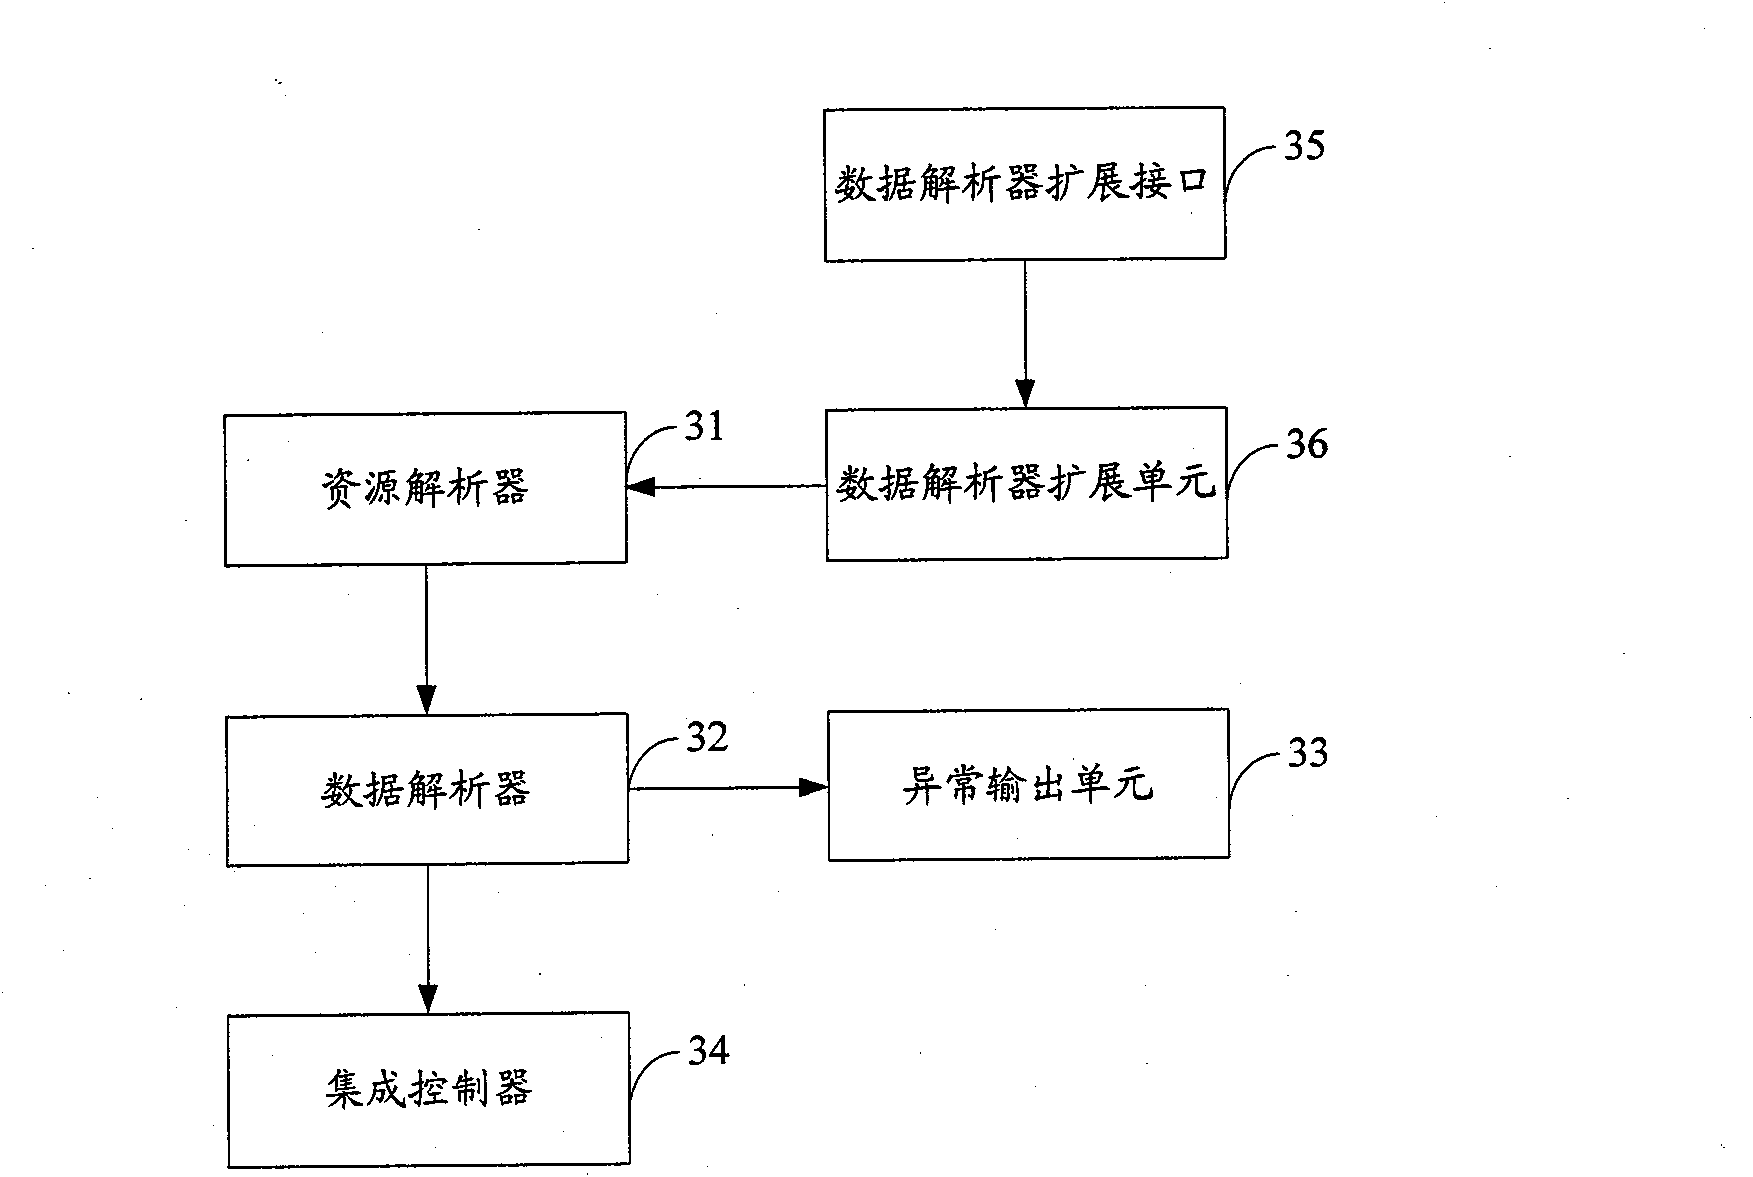 Single-point login system as well as method and device for introducing individuation data